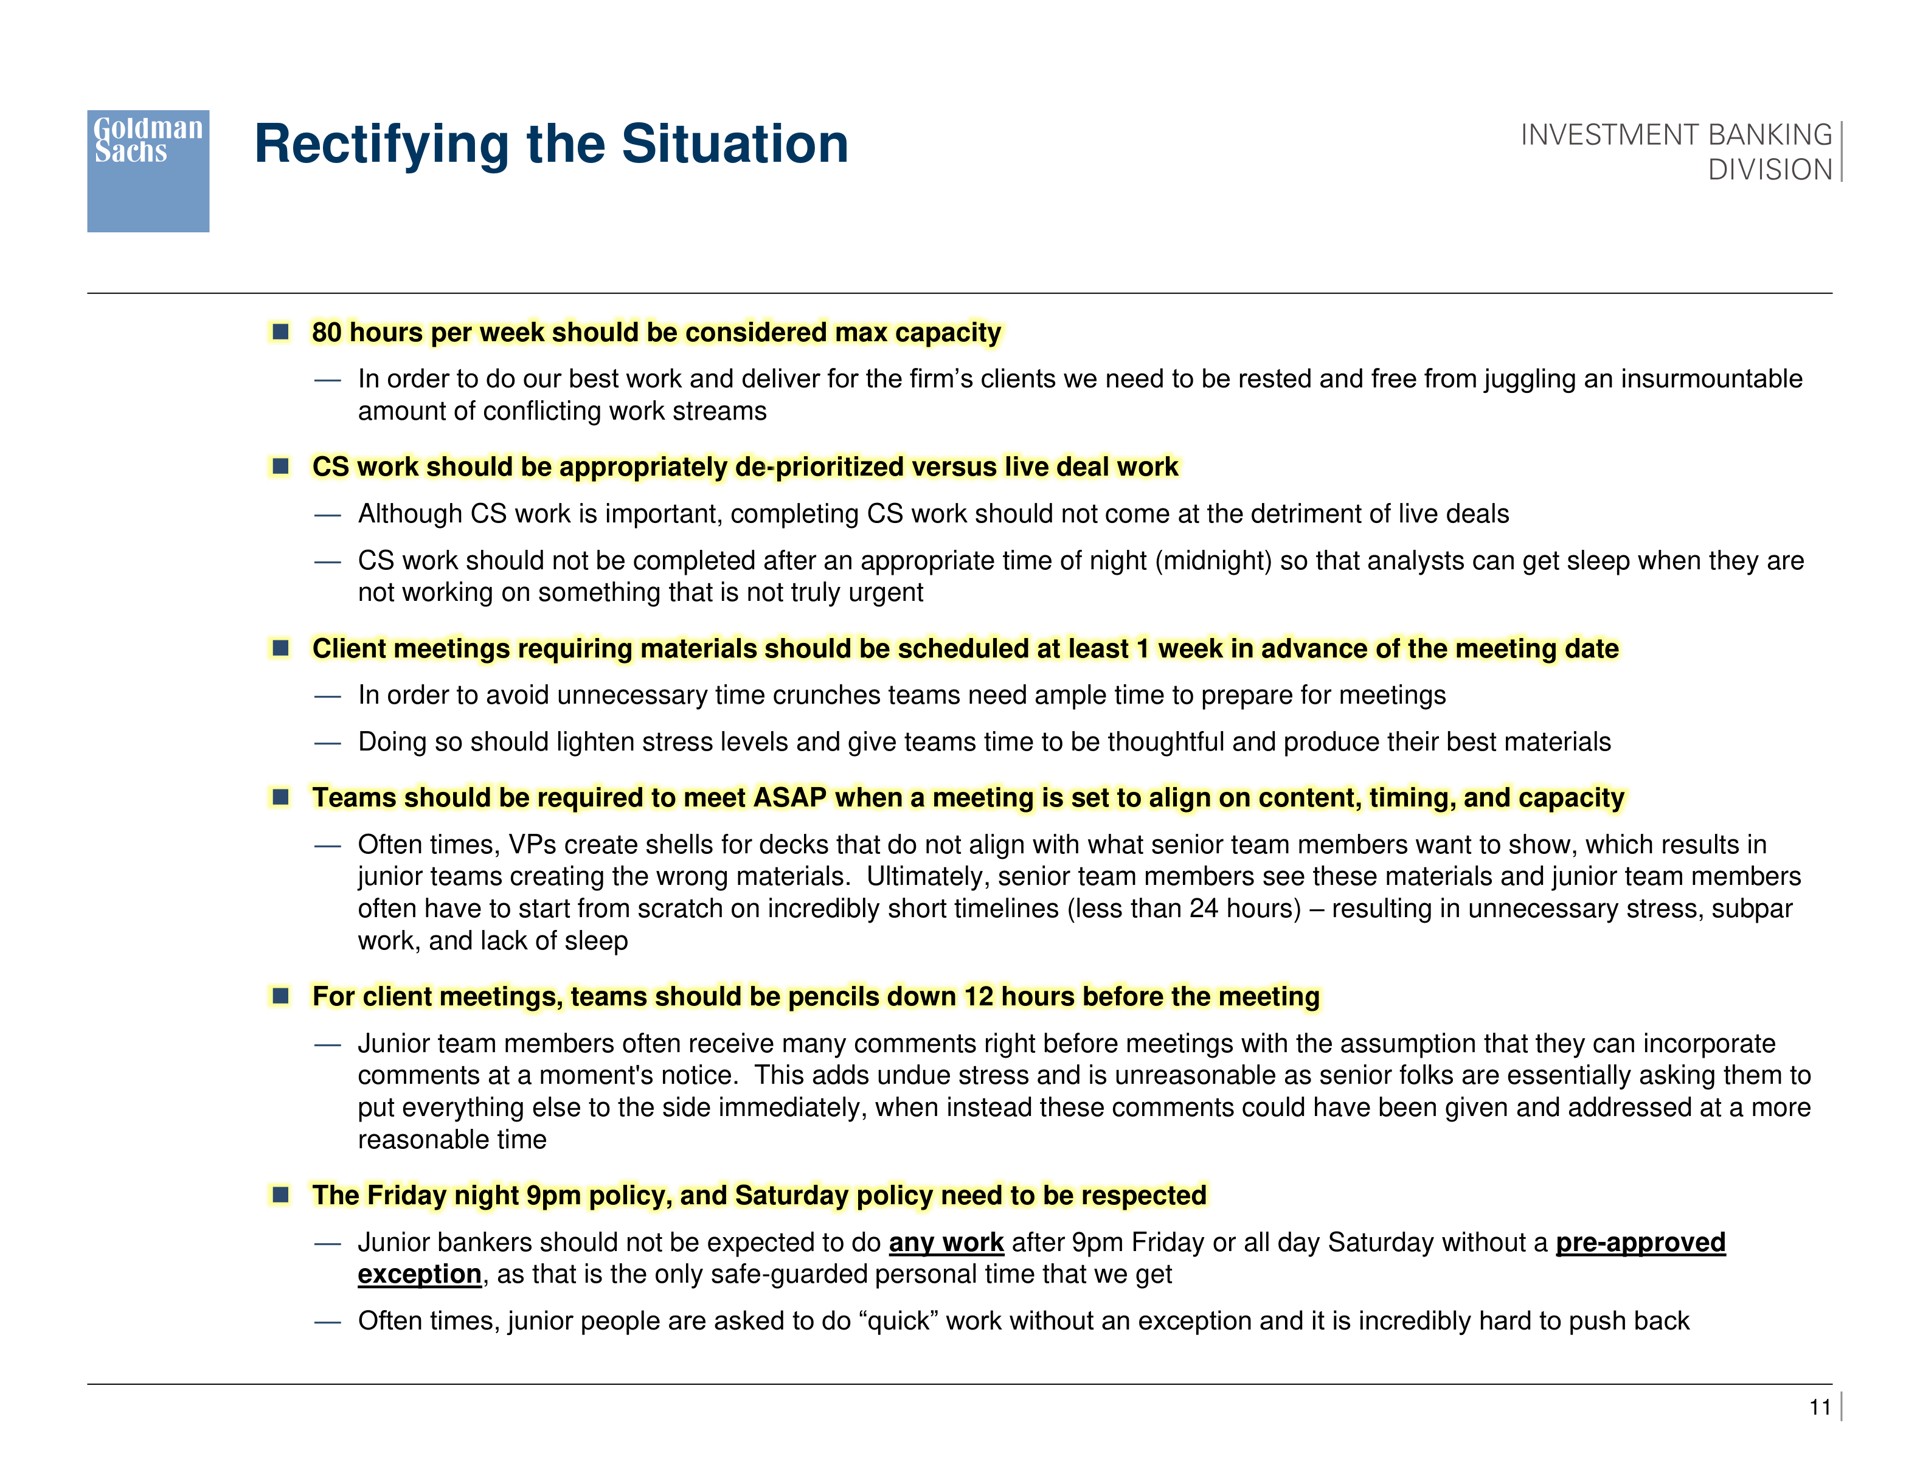 rectifying the situation sion | Goldman Sachs